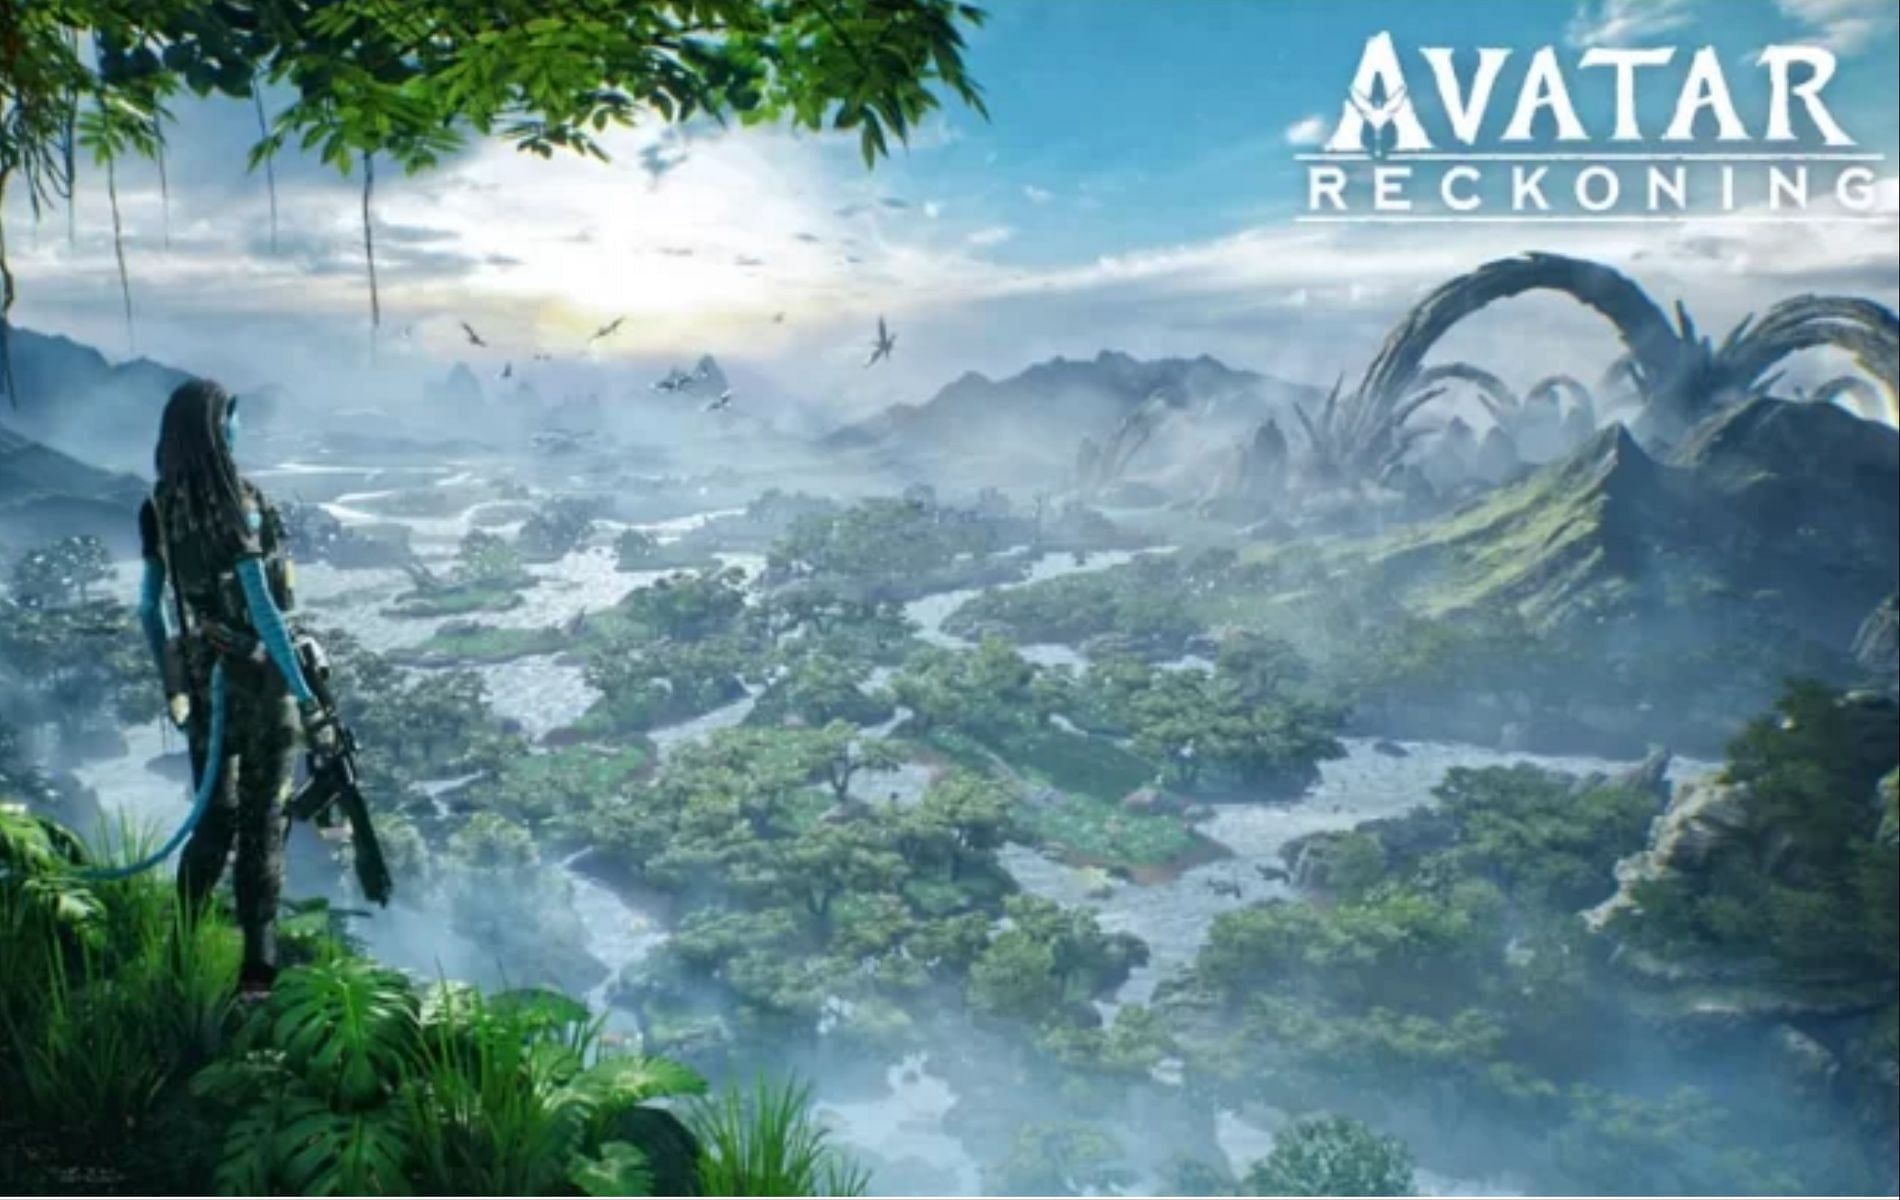 Avatar is one of the biggest movie franchise today, despite having only two films (Image via Tencent)